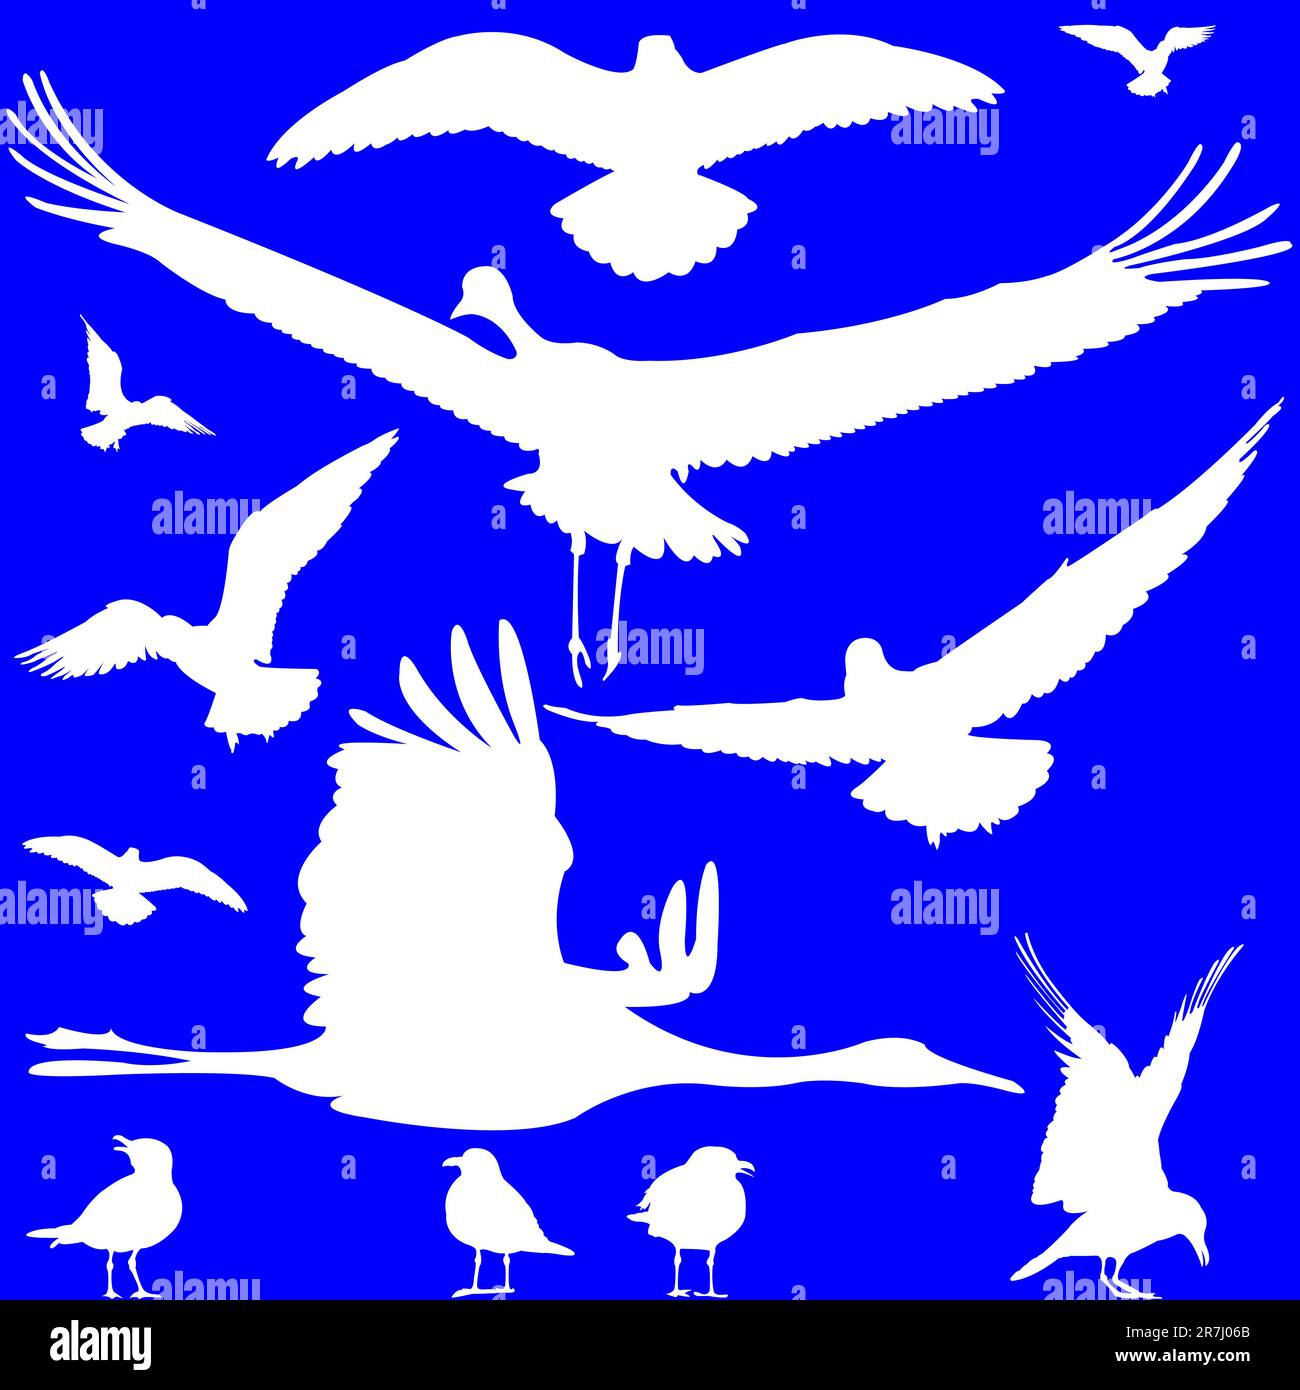 white birds silhouettes over blue, abstract art illustration Stock Vector